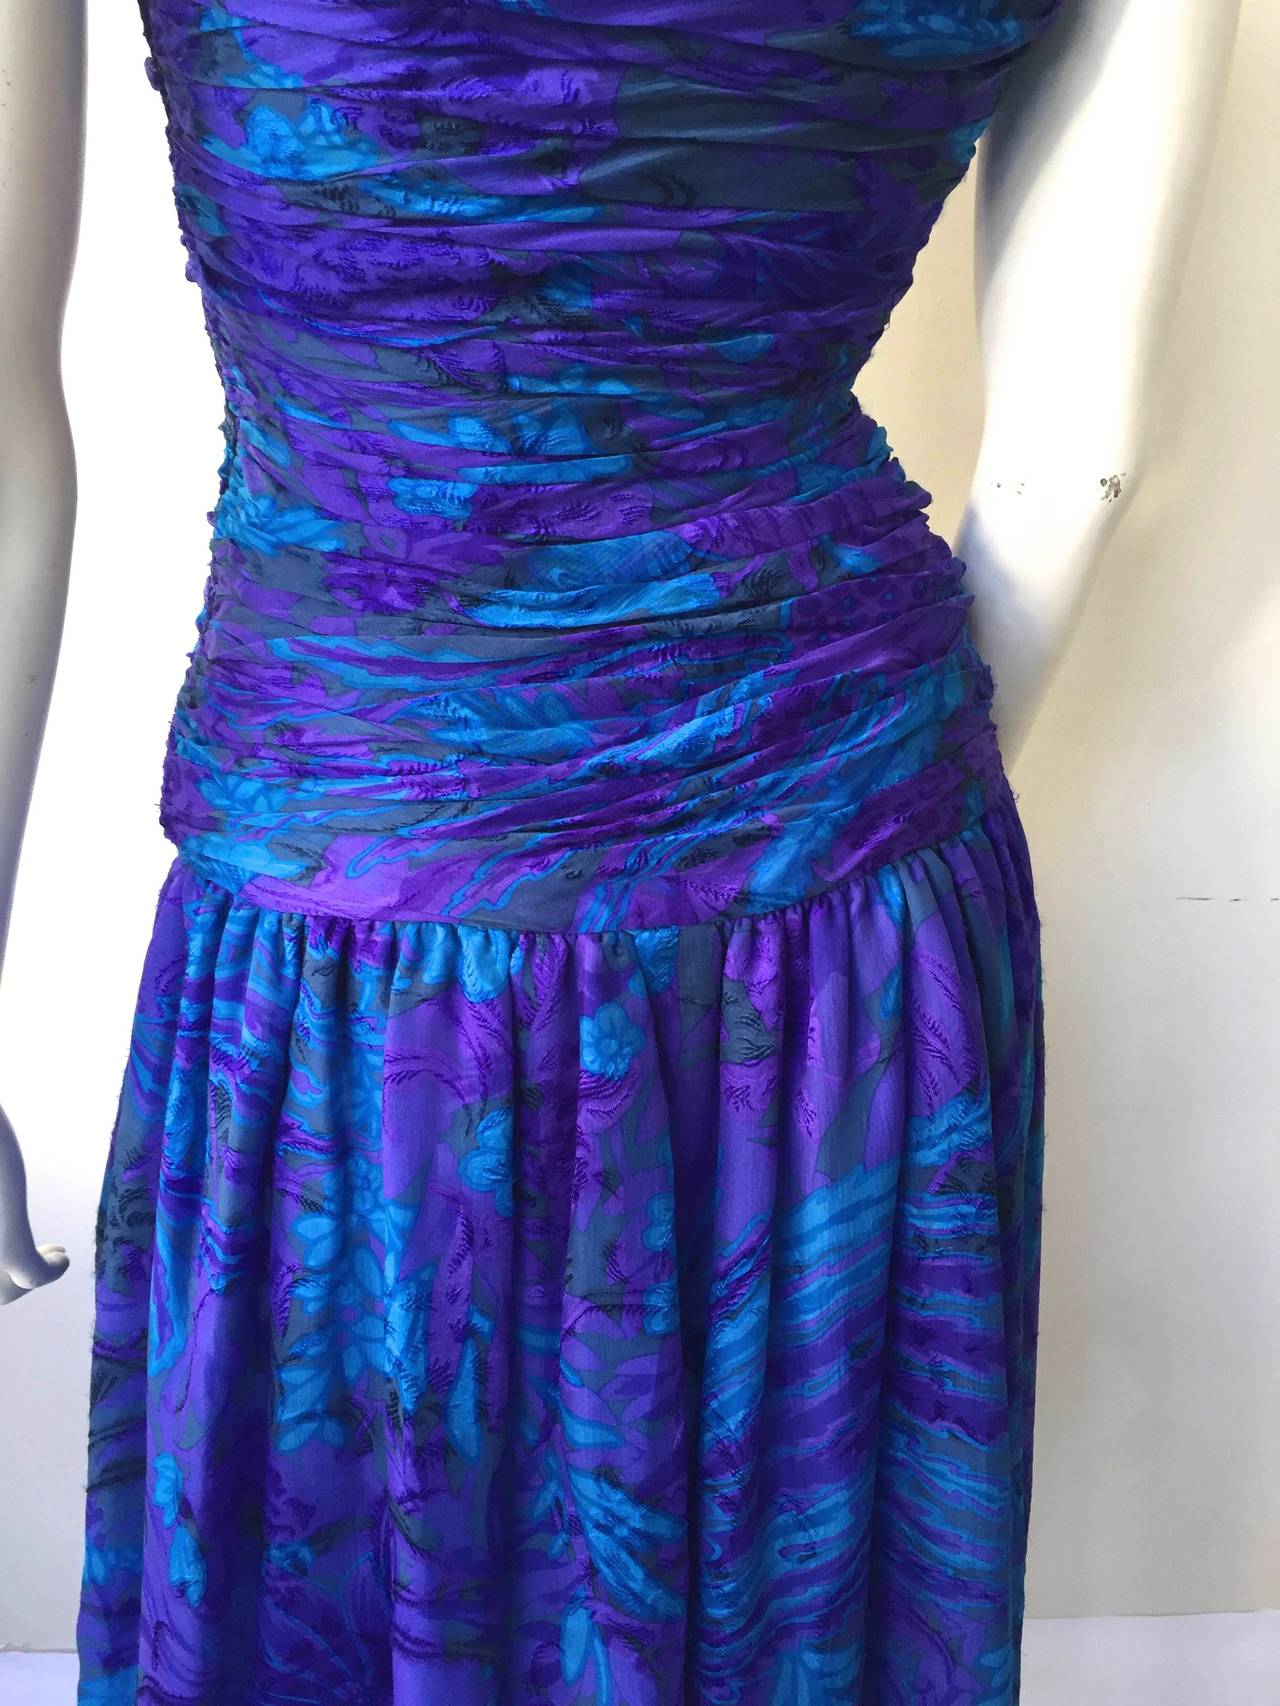 Carolyne Roehm 80s floral silk strapless gown size 4. 2